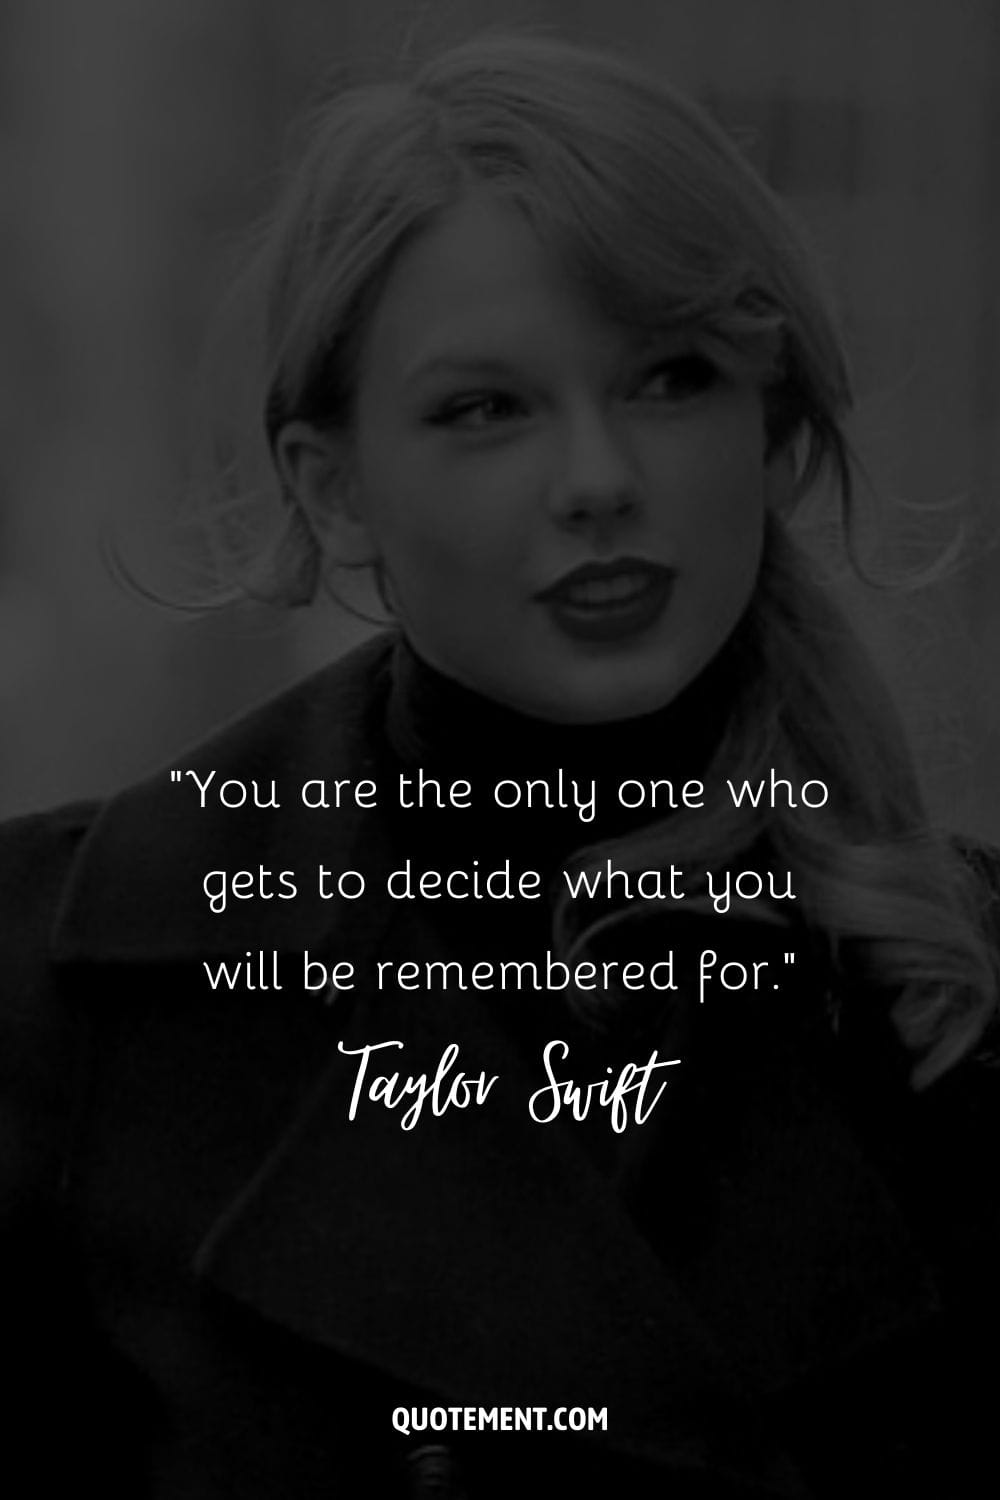 “You are the only one who gets to decide what you will be remembered for.” ― Taylor Swift